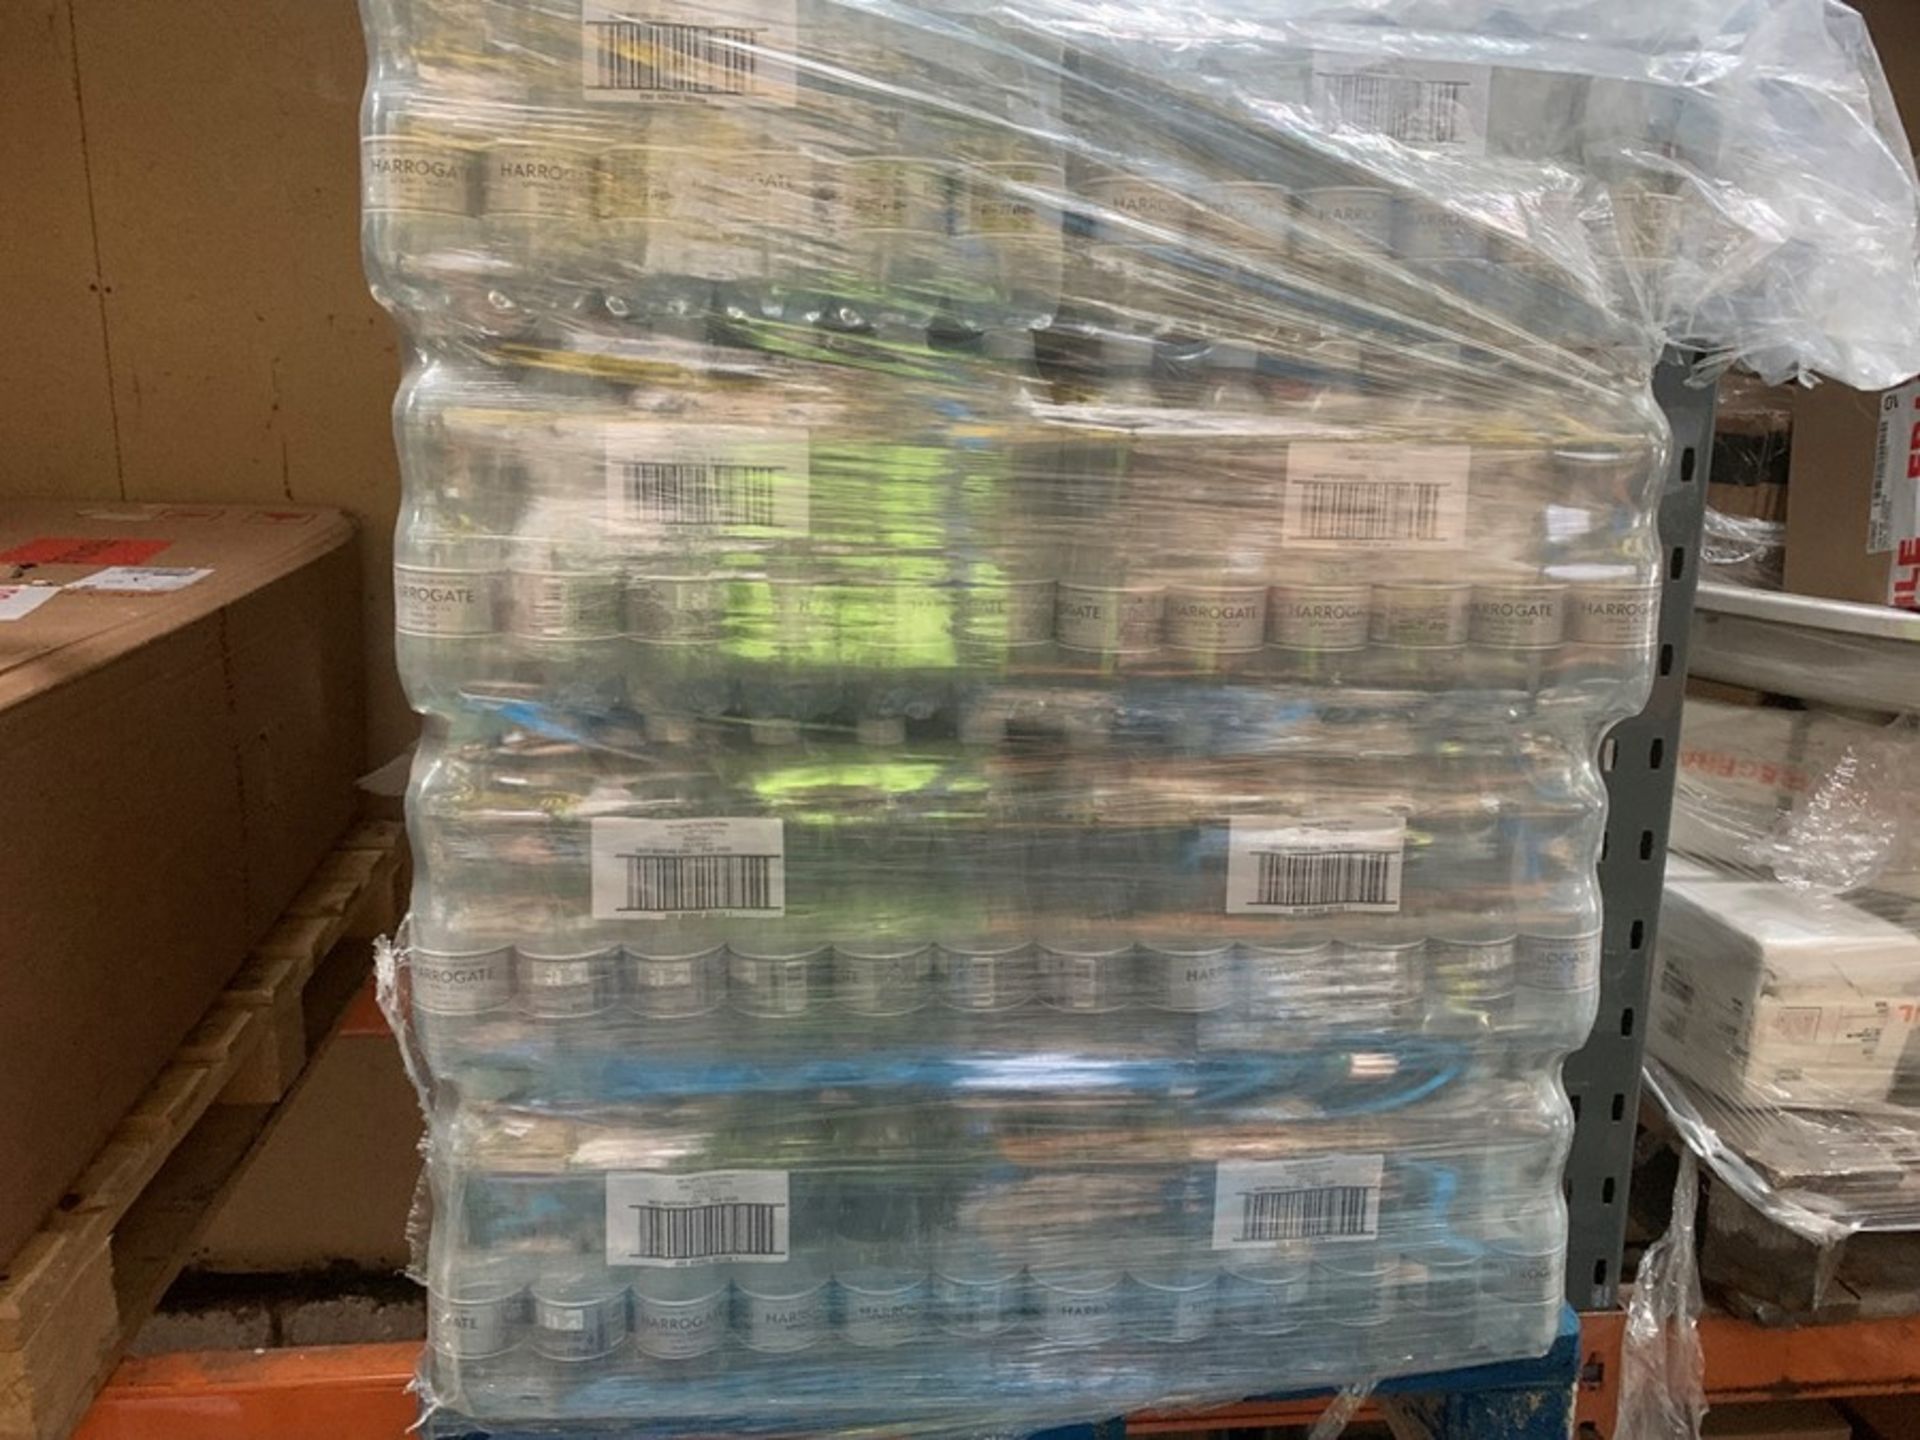 1 LOT TO CONTAIN 40 PACKS OF HARROGATE SPRING SPARKLING WATER / EACH PACK CONTAIN 24 X 500ML BOTTLES